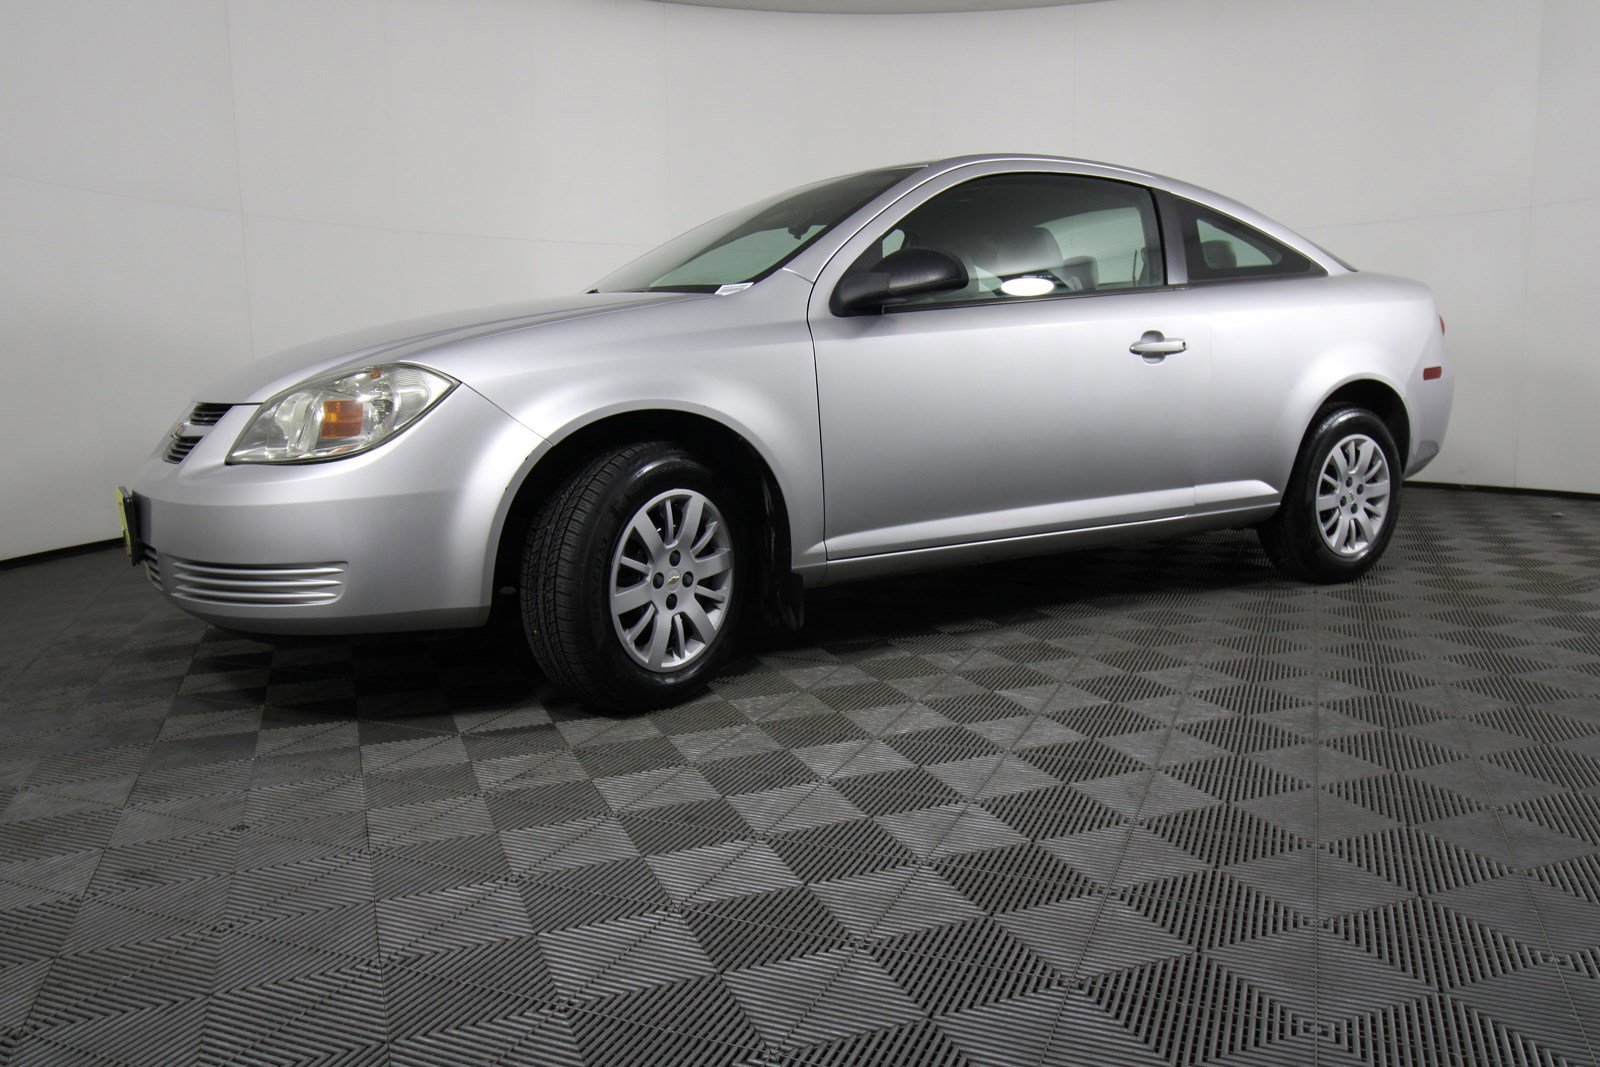 Pre-Owned 2010 Chevrolet Cobalt LS in Nampa #D930298B | Kendall Value Lot